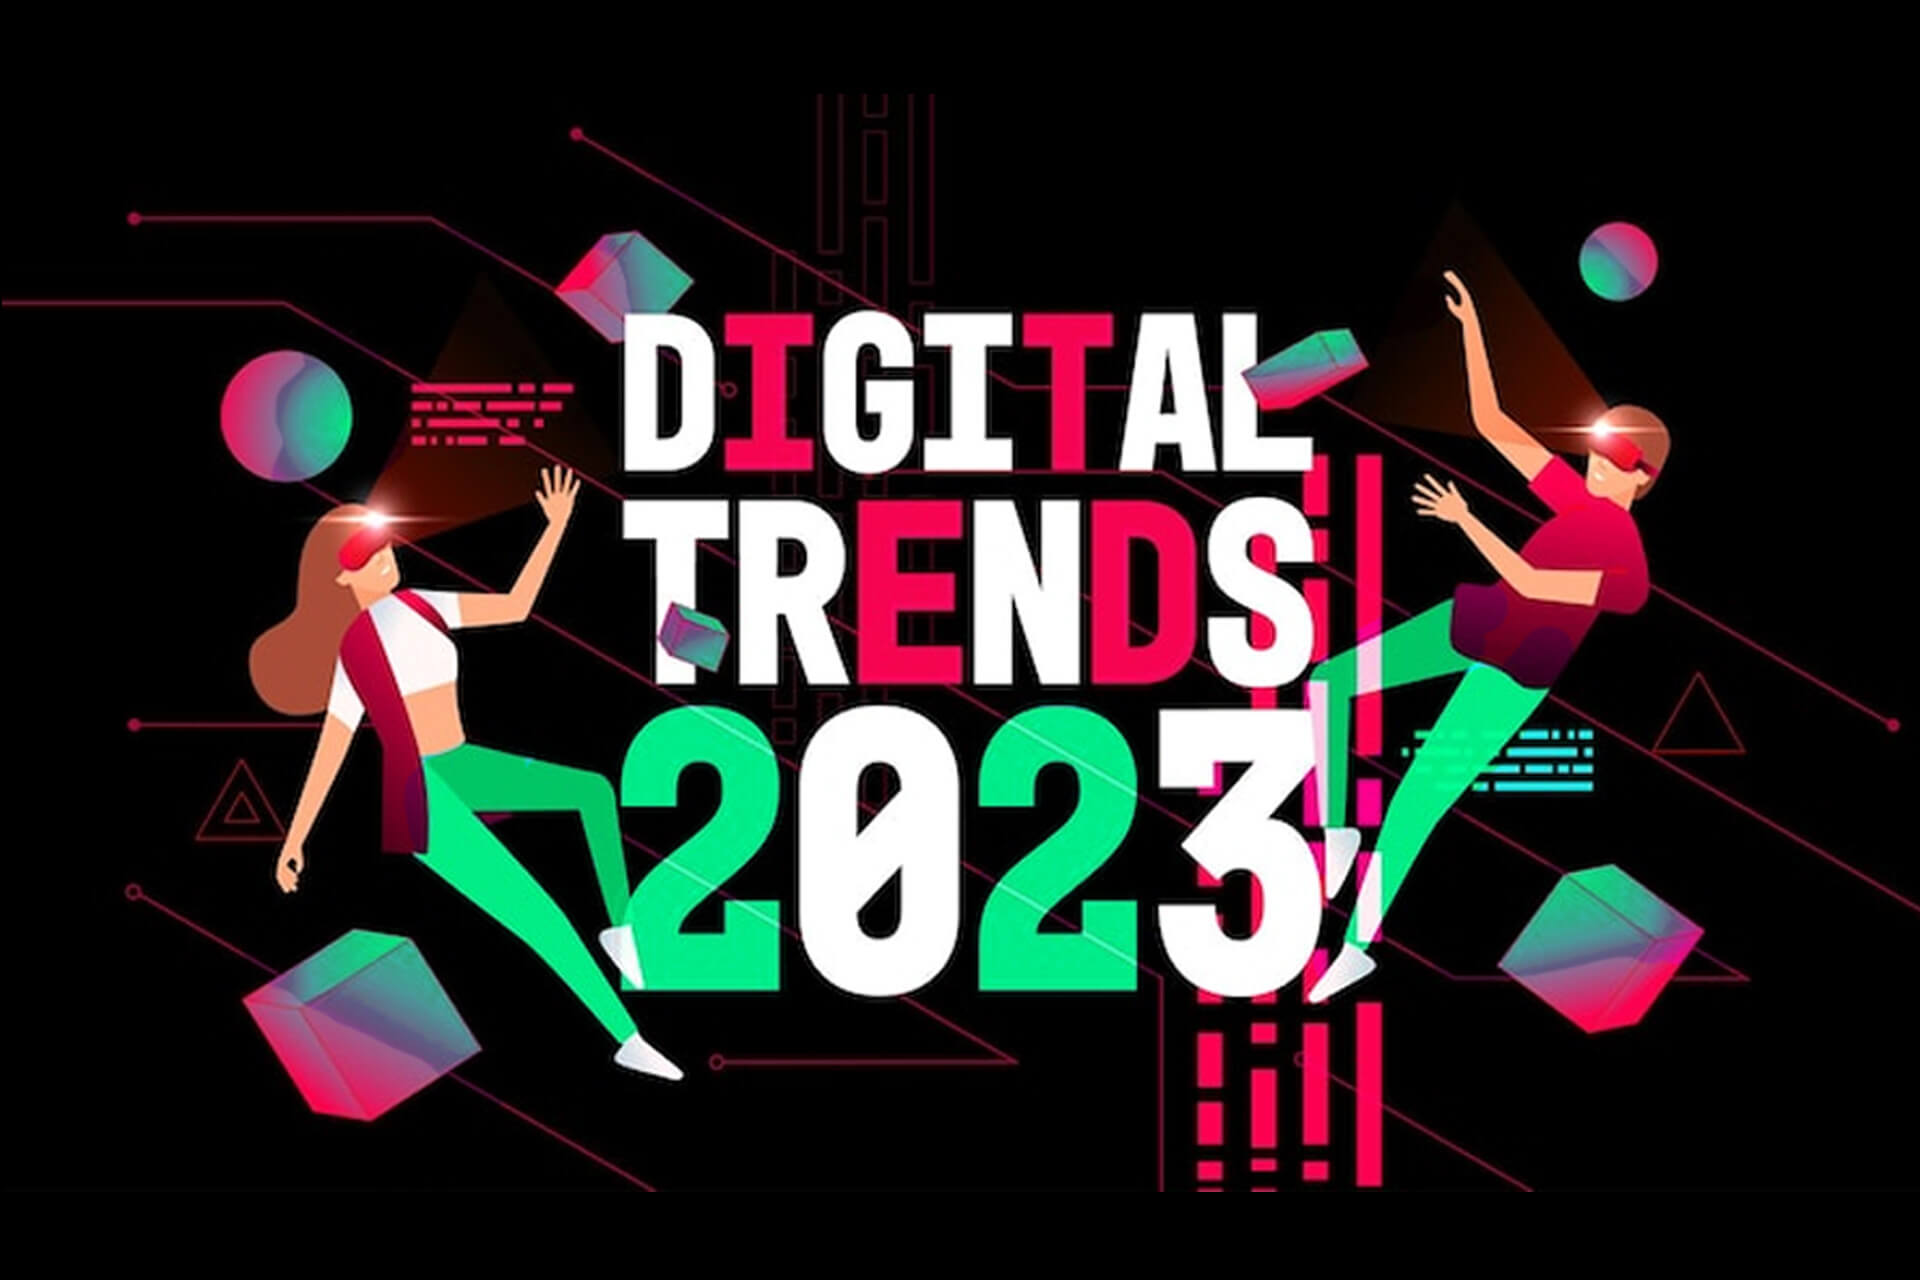 WEB MARKETING TRENDS TO WATCH OUT FOR IN 2023